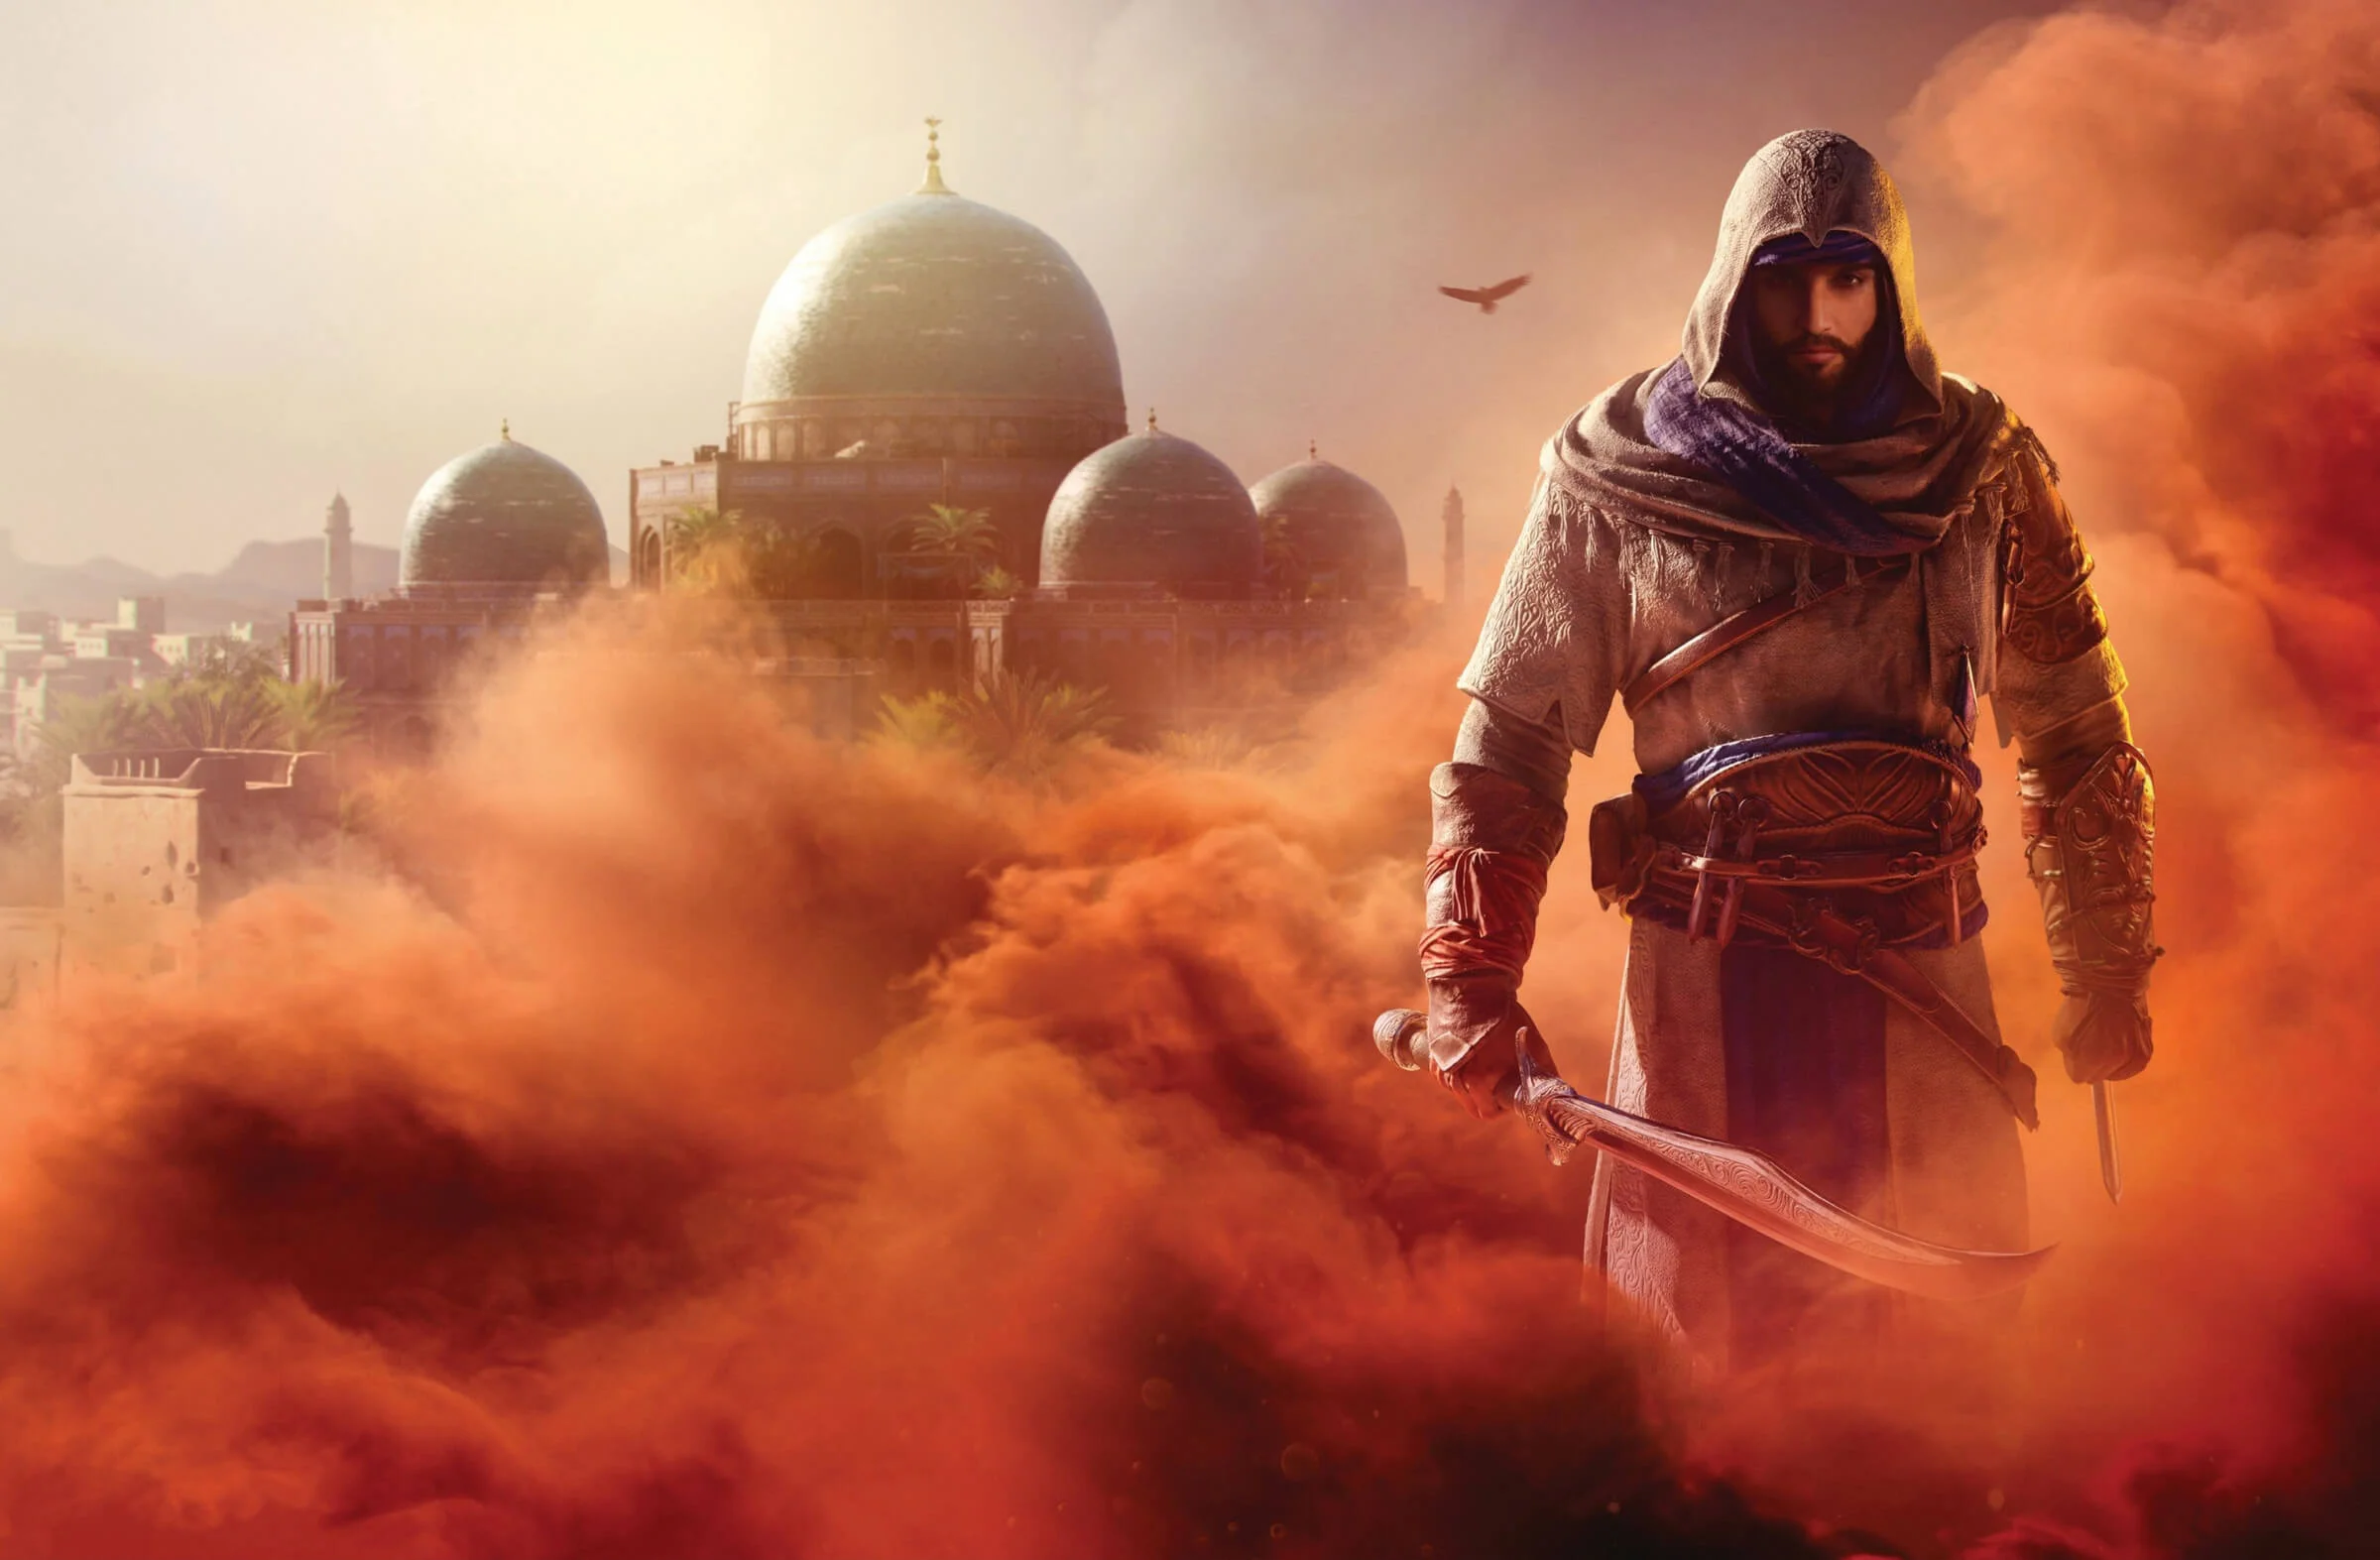 Another Assassin's Creed: Mirage trailer demonstrates stealth capabilities